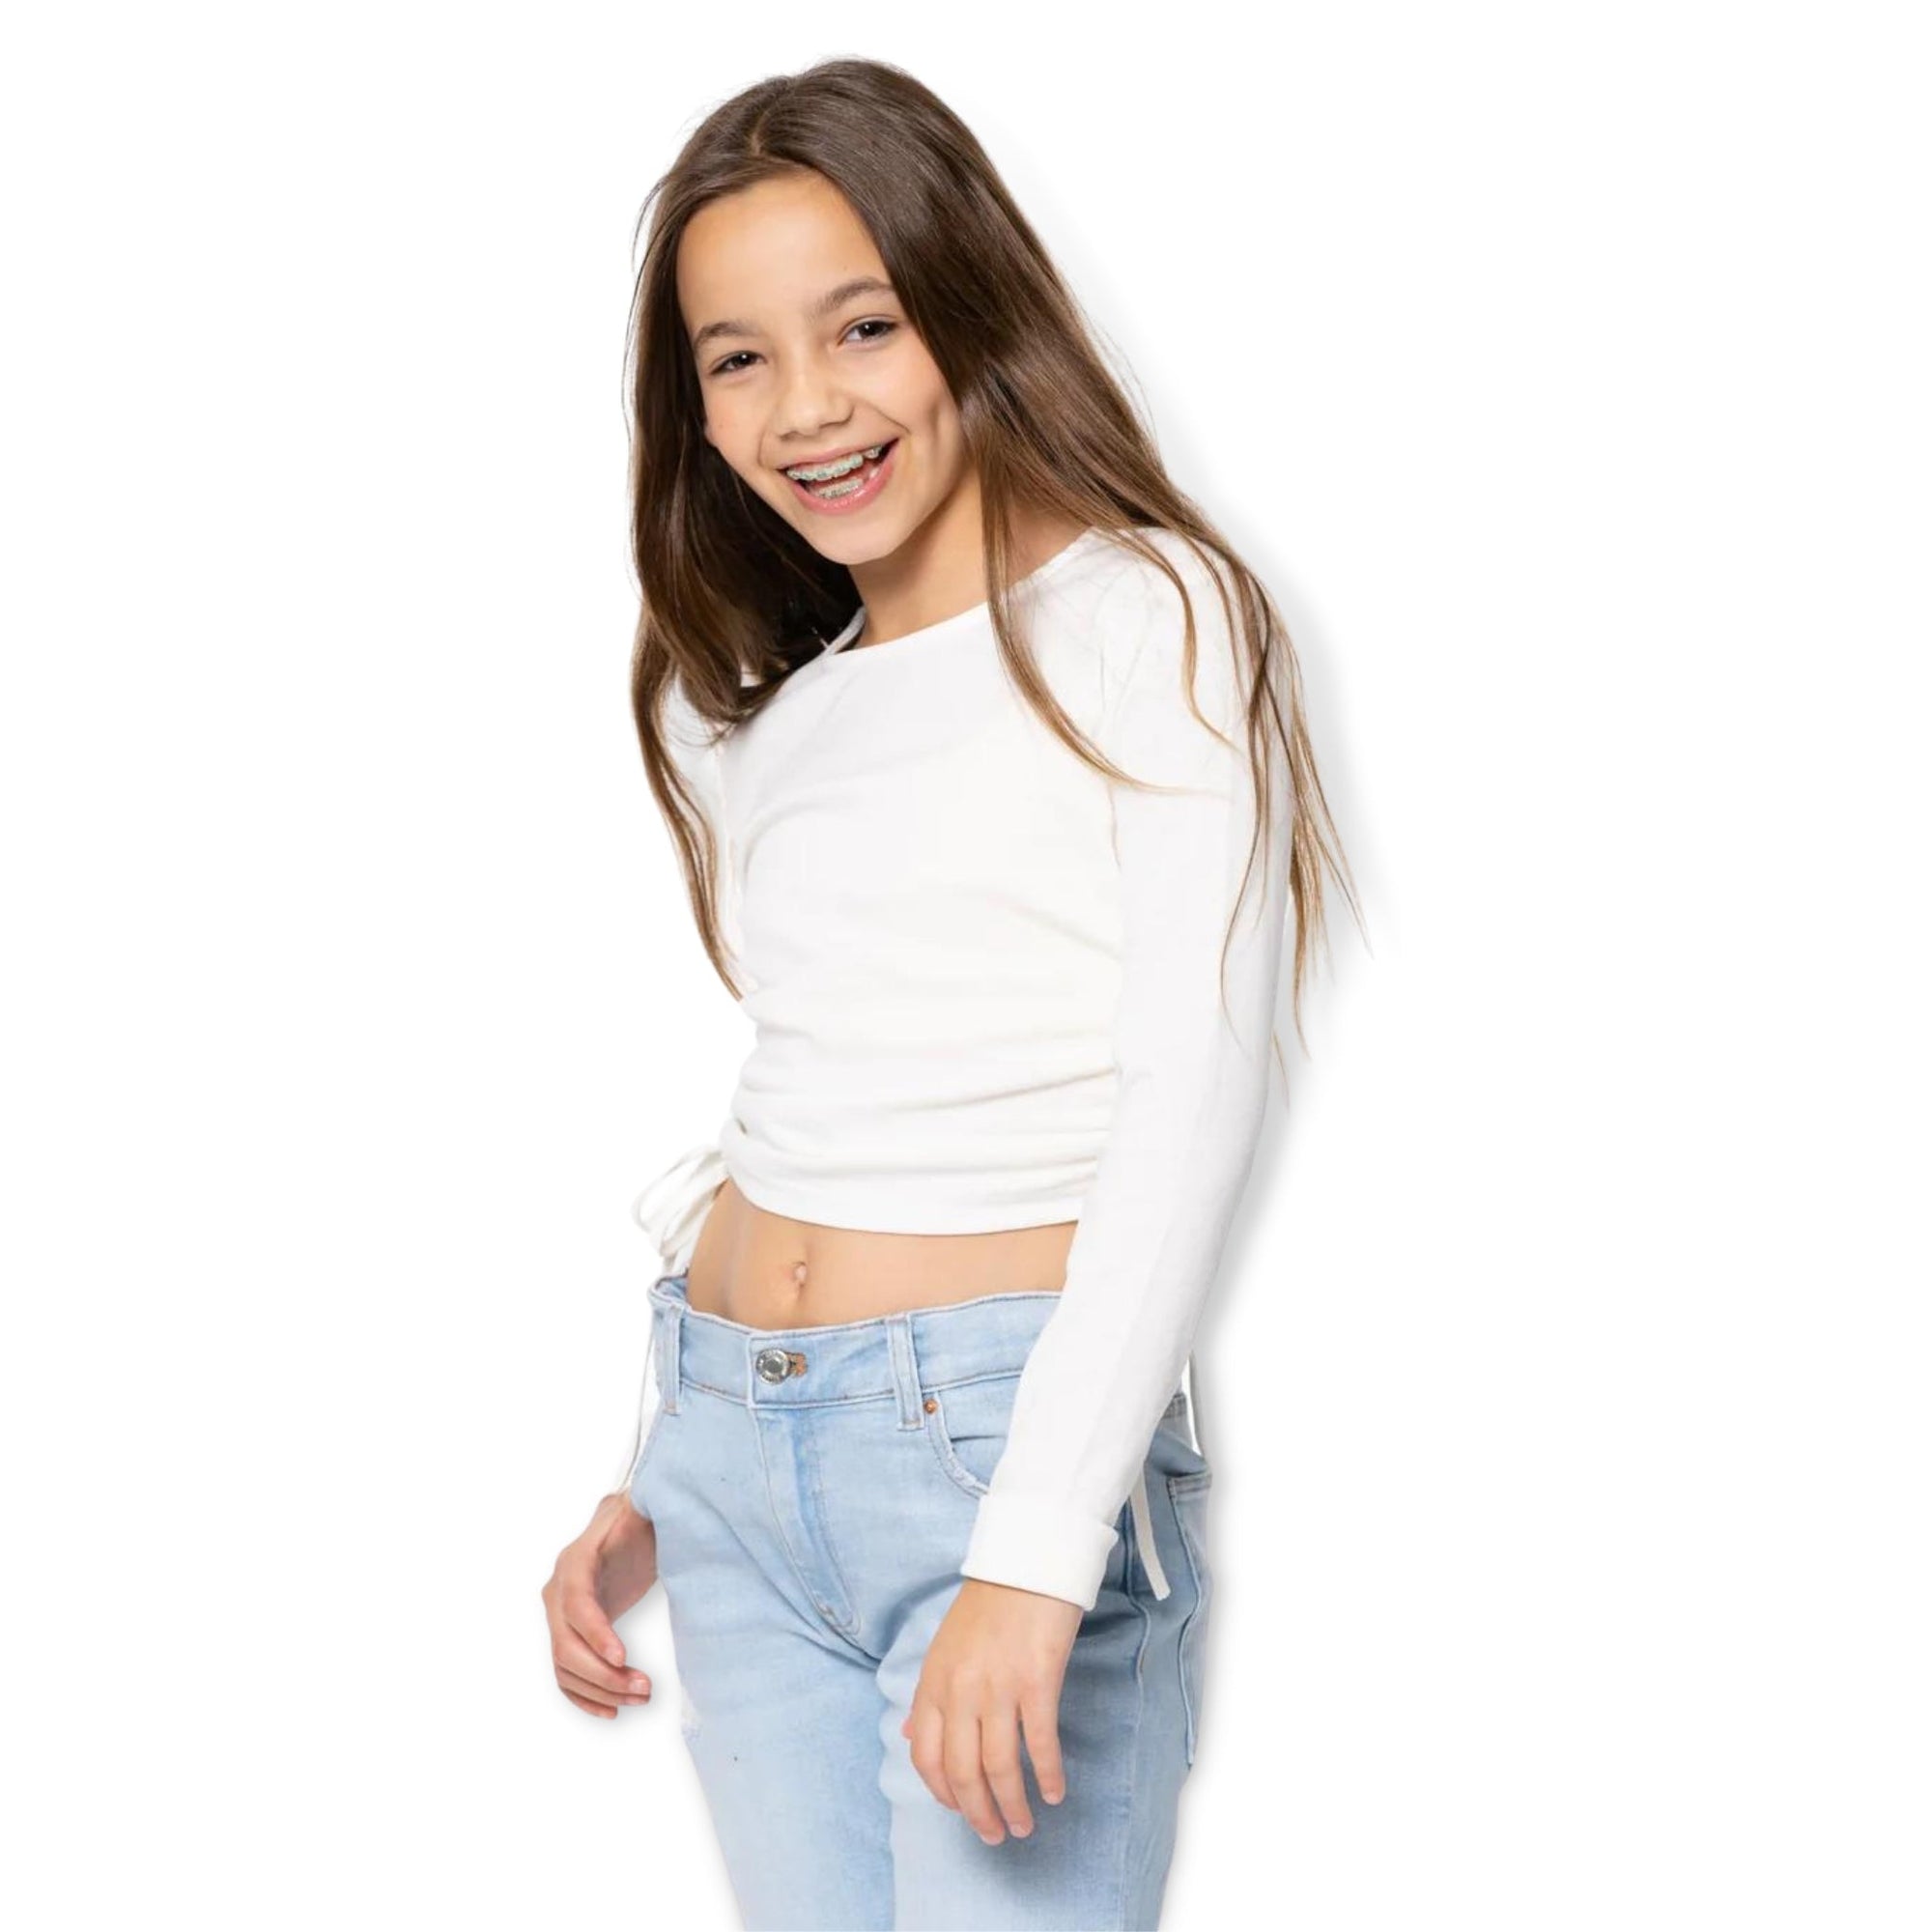 Malibu Sugar Winter White Long Sleeve Top with Ruching and Tie on the side - a Spirit Animal - Long Sleeve Top active August 2023 Long Sleeve Top Long Sleeved Top